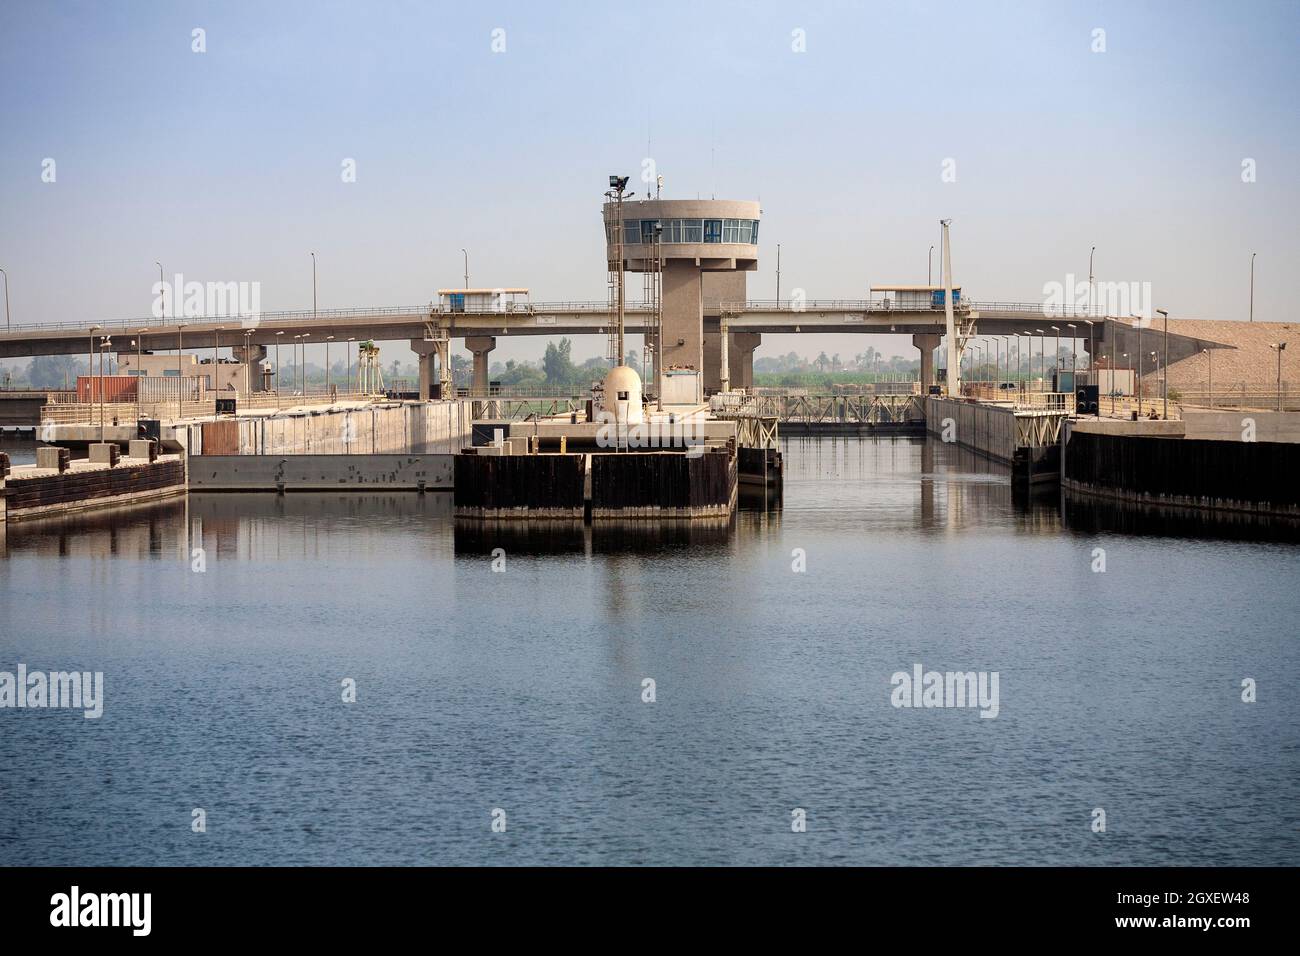 Two empty lock bays with control tower on the river Nile, Egypt Stock Photo